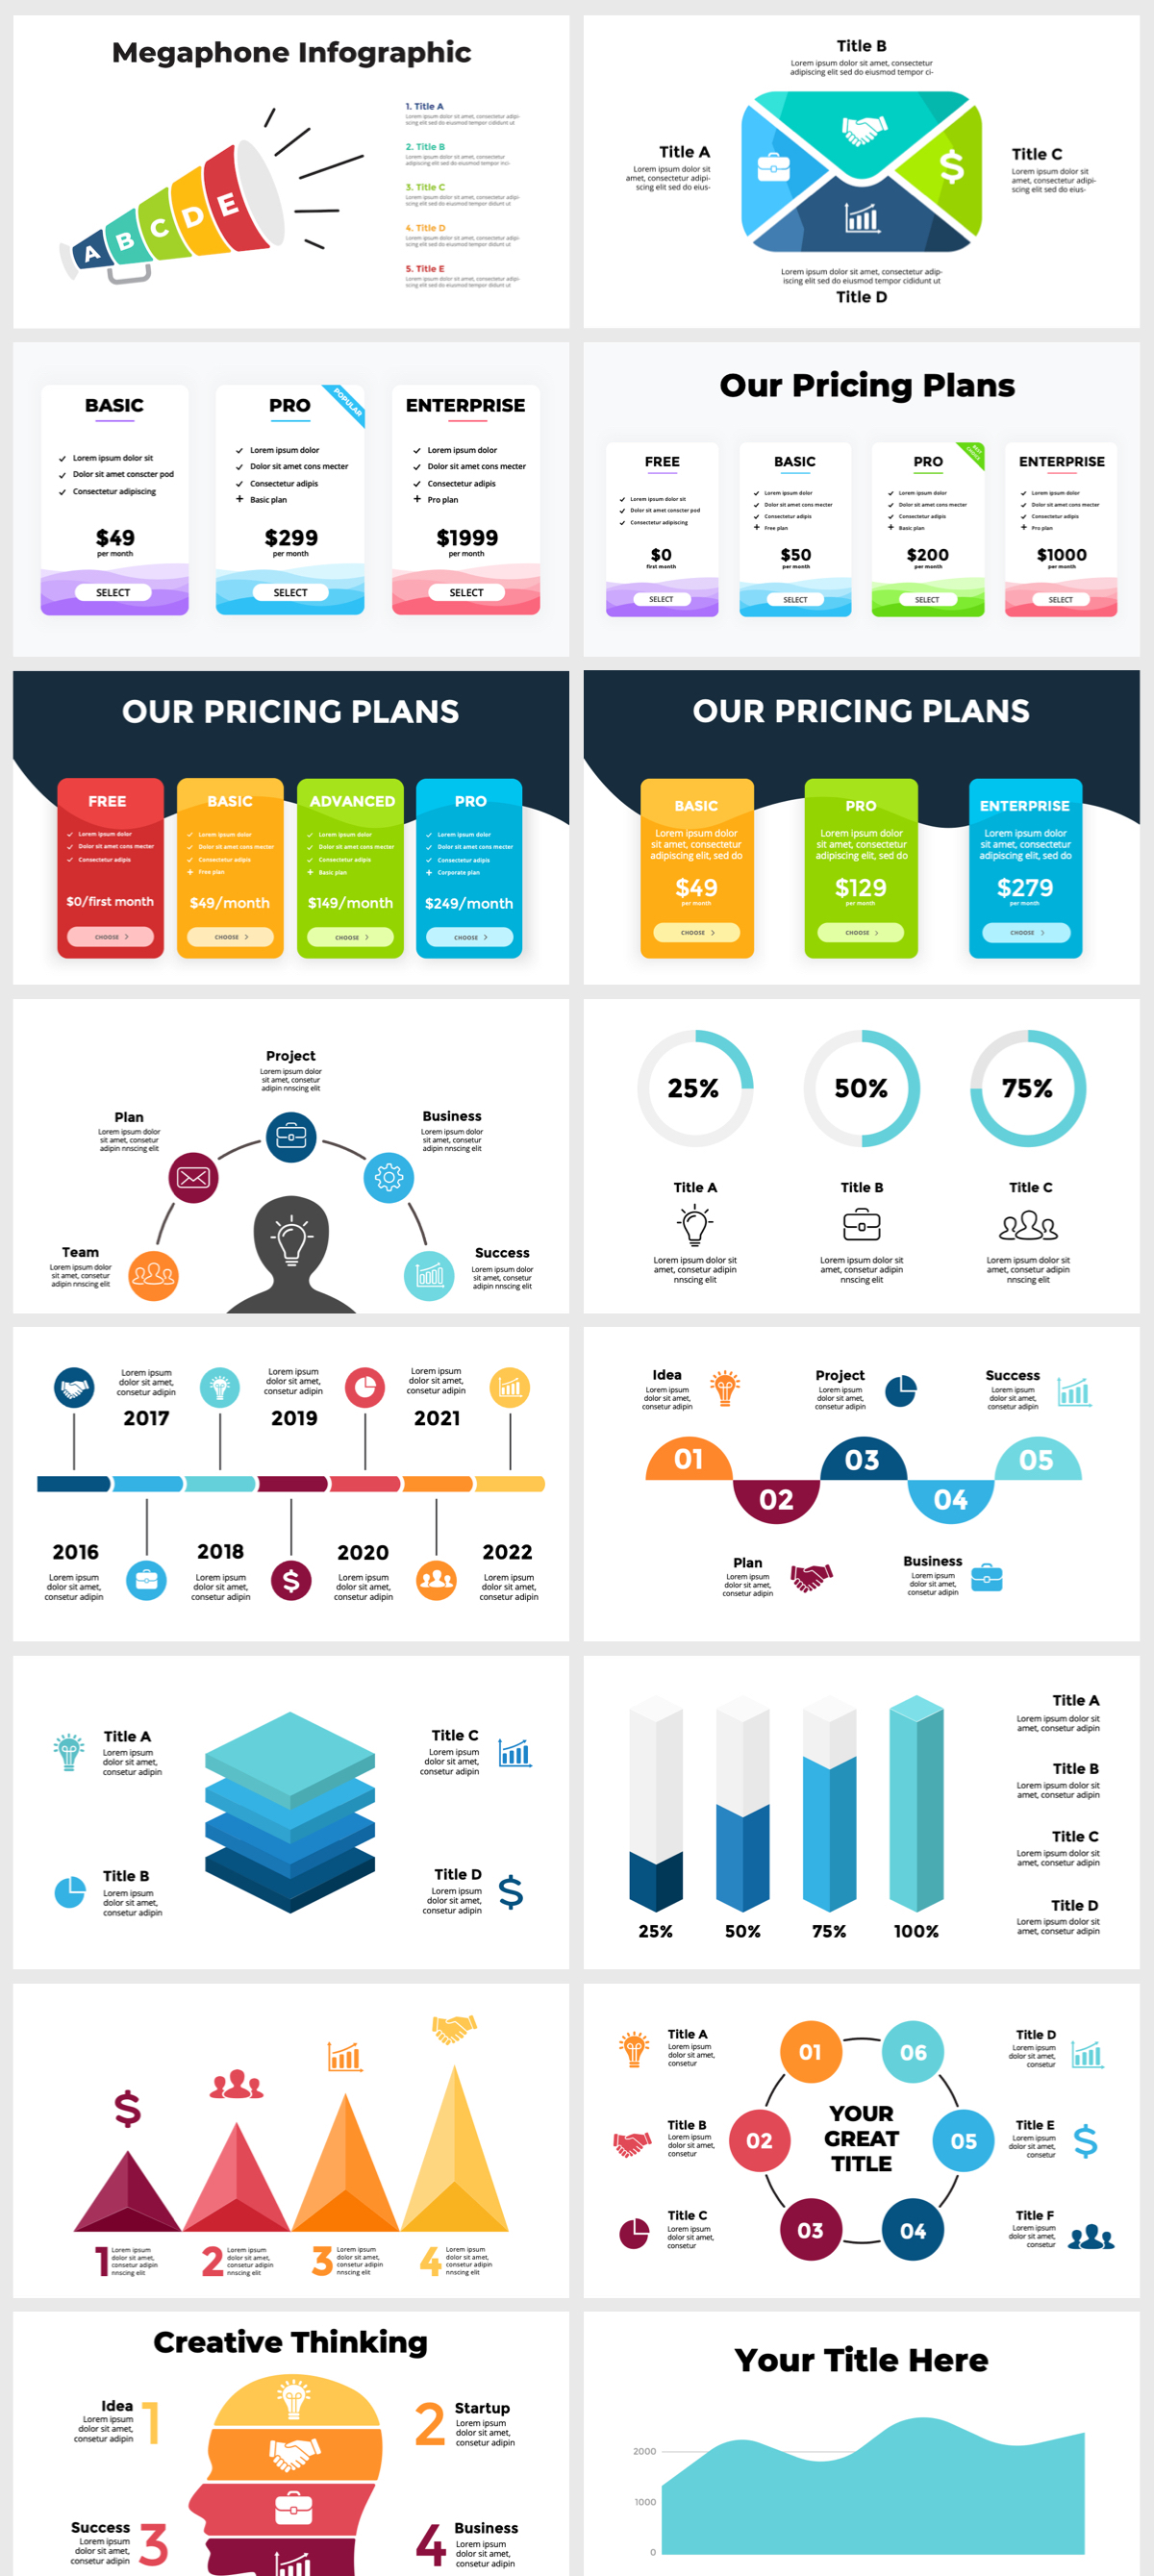 Wowly - 3500 Infographics & Presentation Templates! Updated! PowerPoint Canva Figma Sketch Ai Psd. - 148